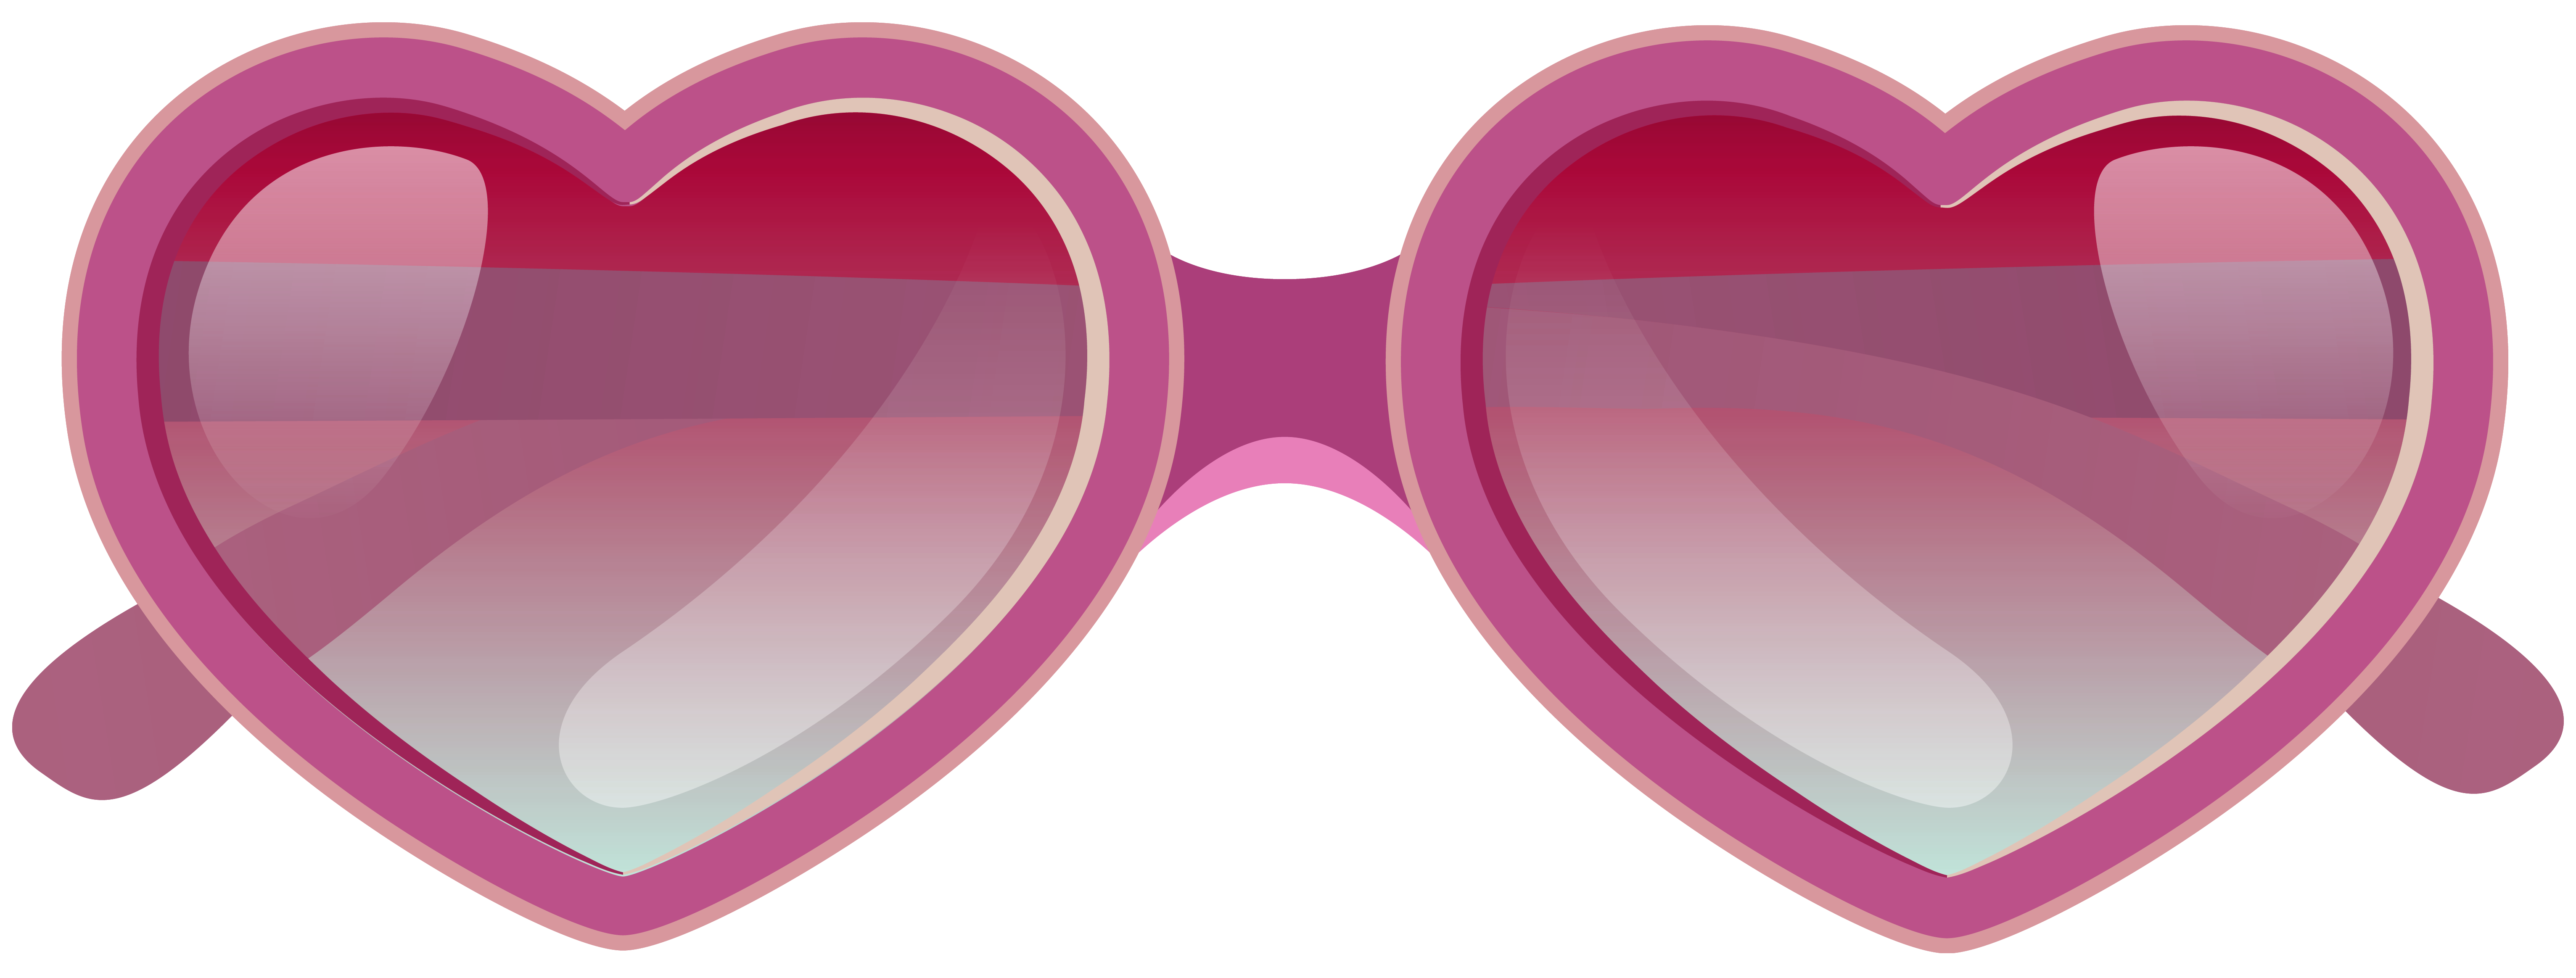 Heart sunglasses png image. Goggles clipart pink